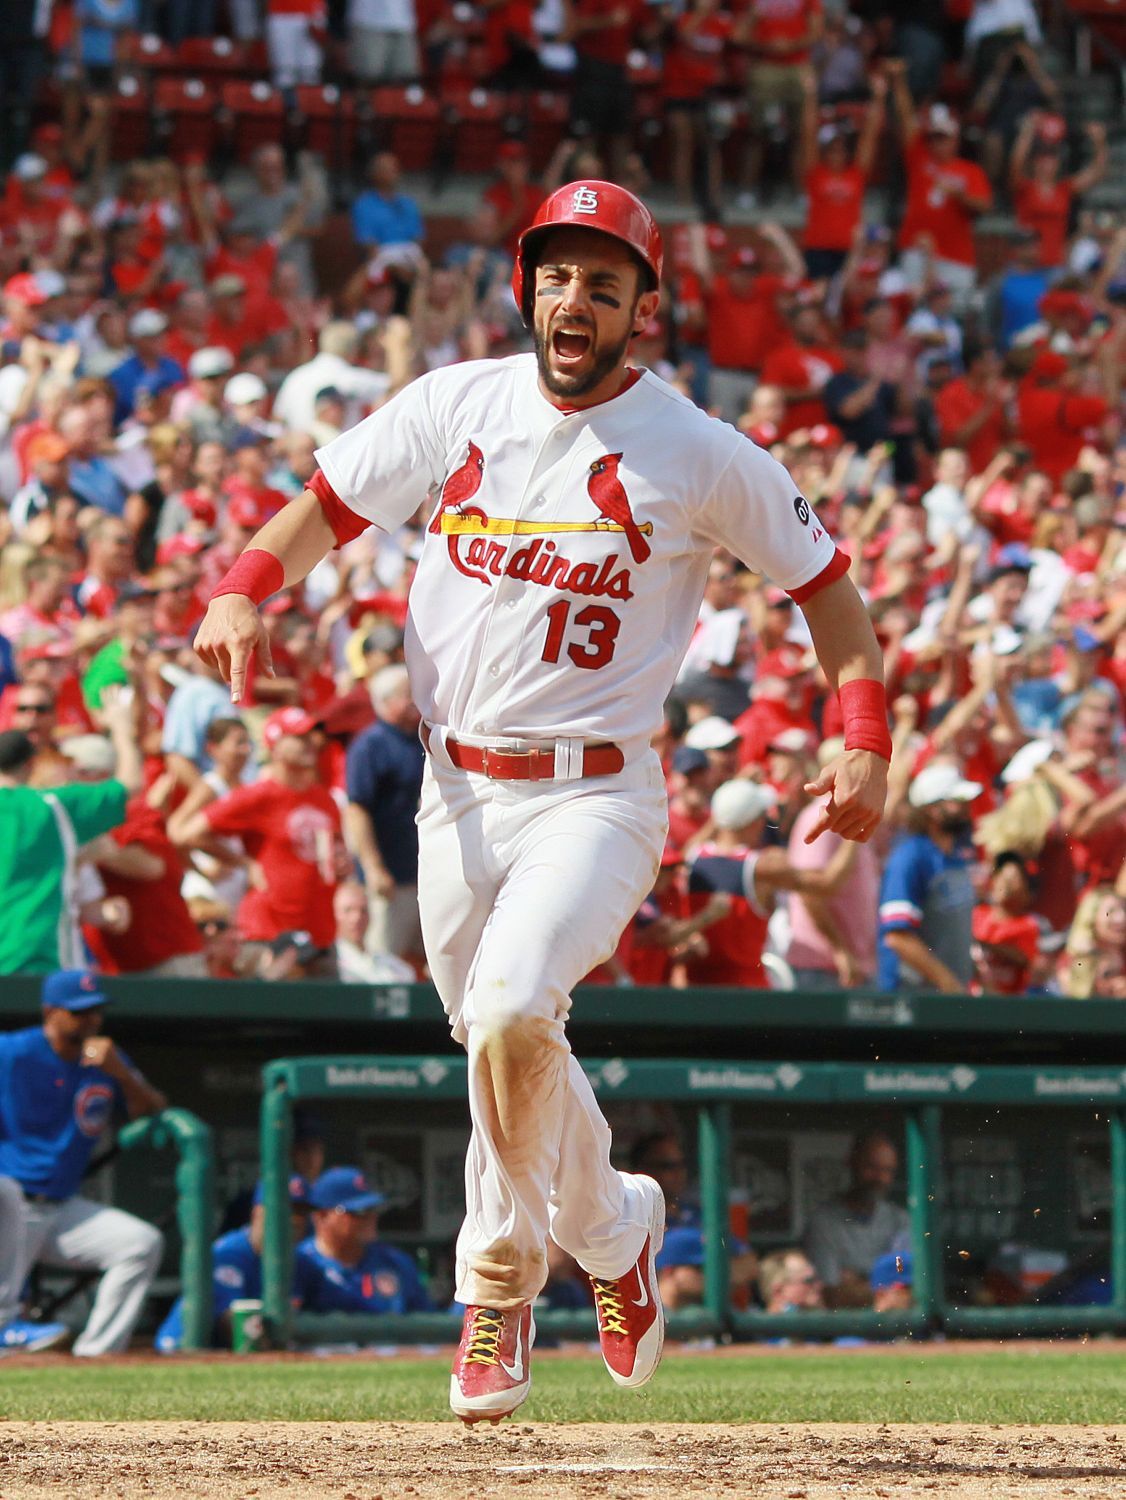 Cards come back against Cubs 4-3 | St. Louis Cardinals | www.paulmartinsmith.com